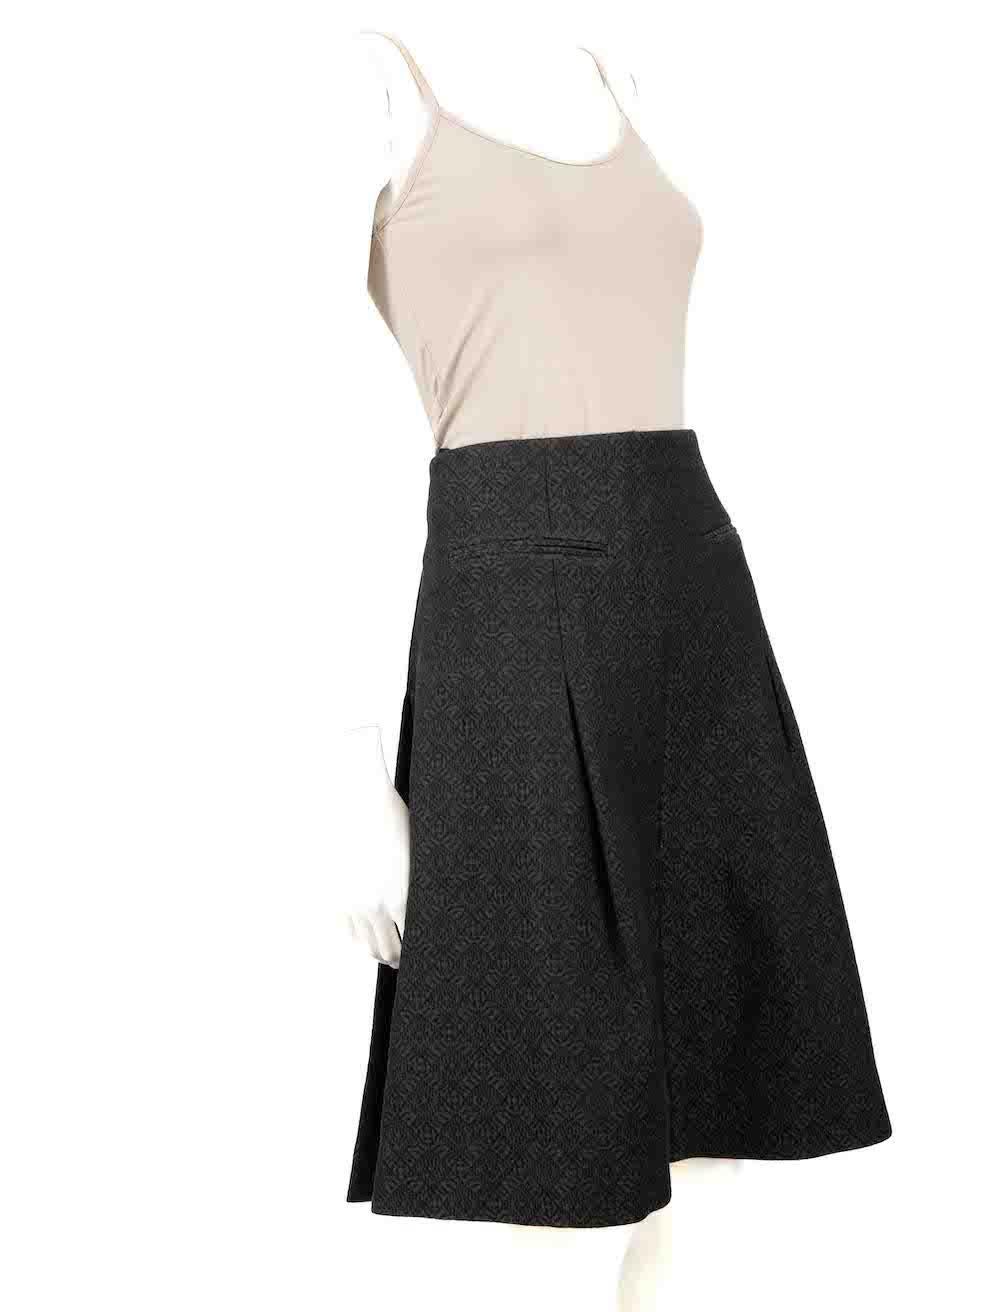 CONDITION is Very good. Minimal wear to skirt is evident where rear zipper seam is loosen on this used Céline designer resale item.
 
 
 
 Details
 
 
 Black
 
 Cotton
 
 Pleated skirt
 
 Jacquard quilted pattern accent
 
 2x Front side pockets
 
